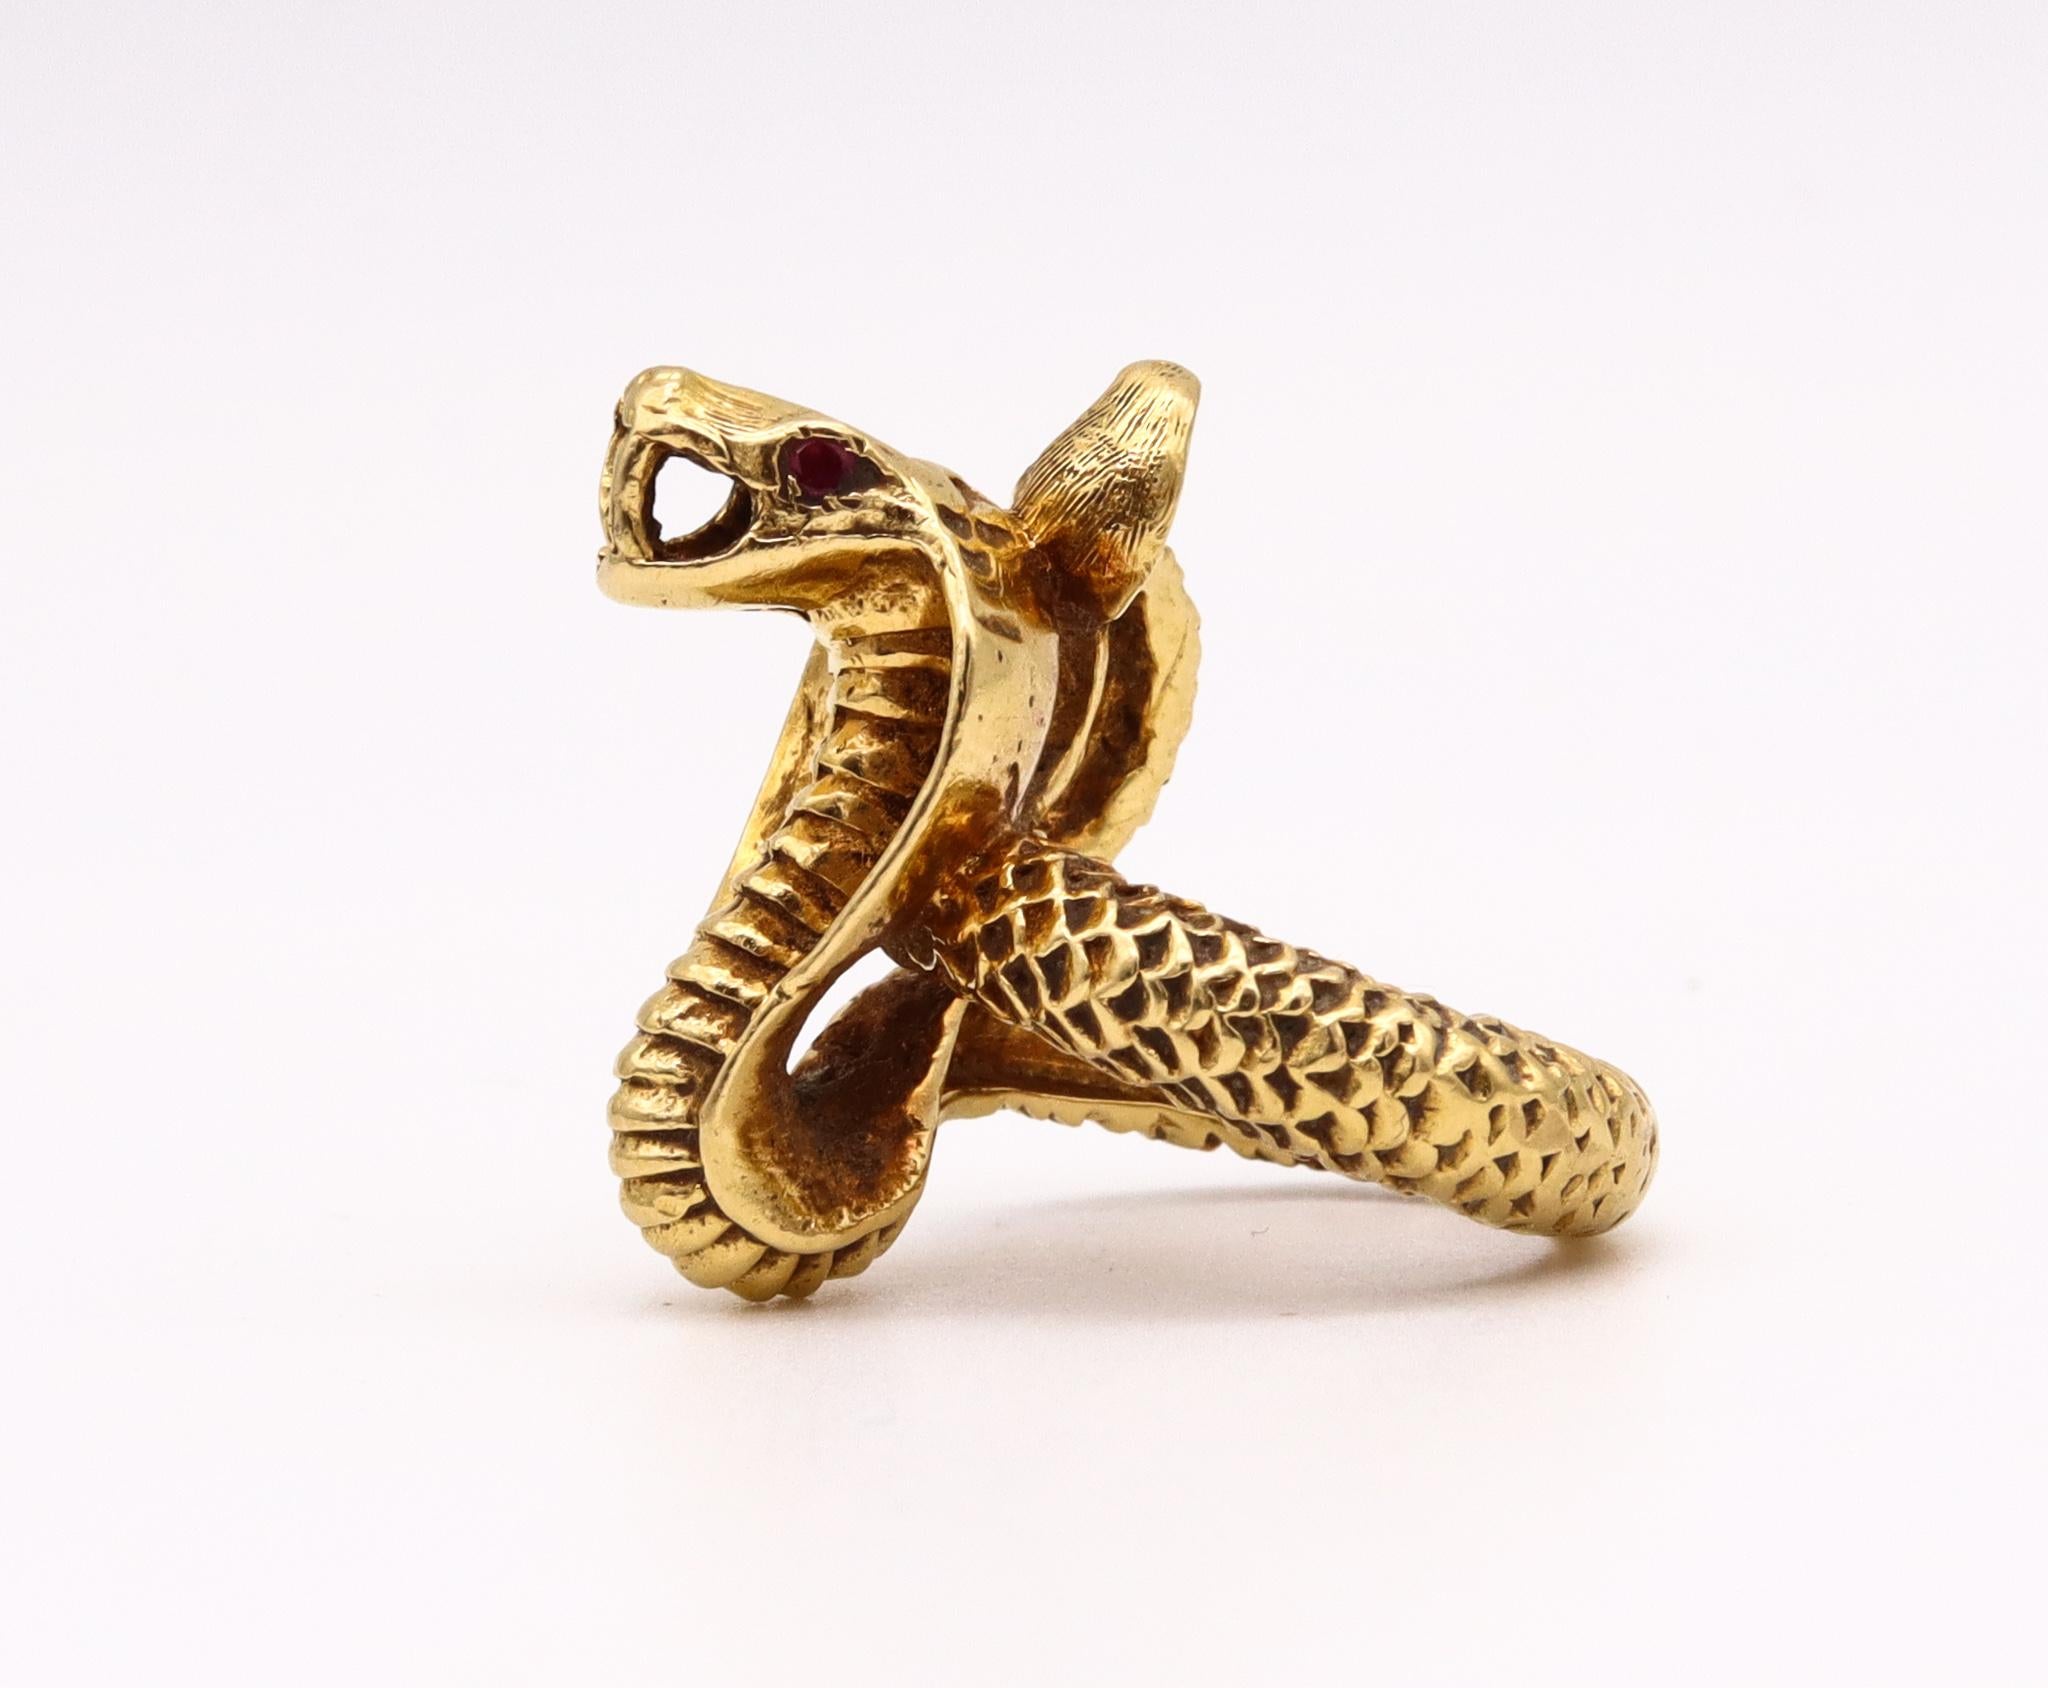 Brilliant Cut Egyptian Revival 1930 Art Deco Sculpted Cobra Ring 18Kt Yellow Gold with Rubies